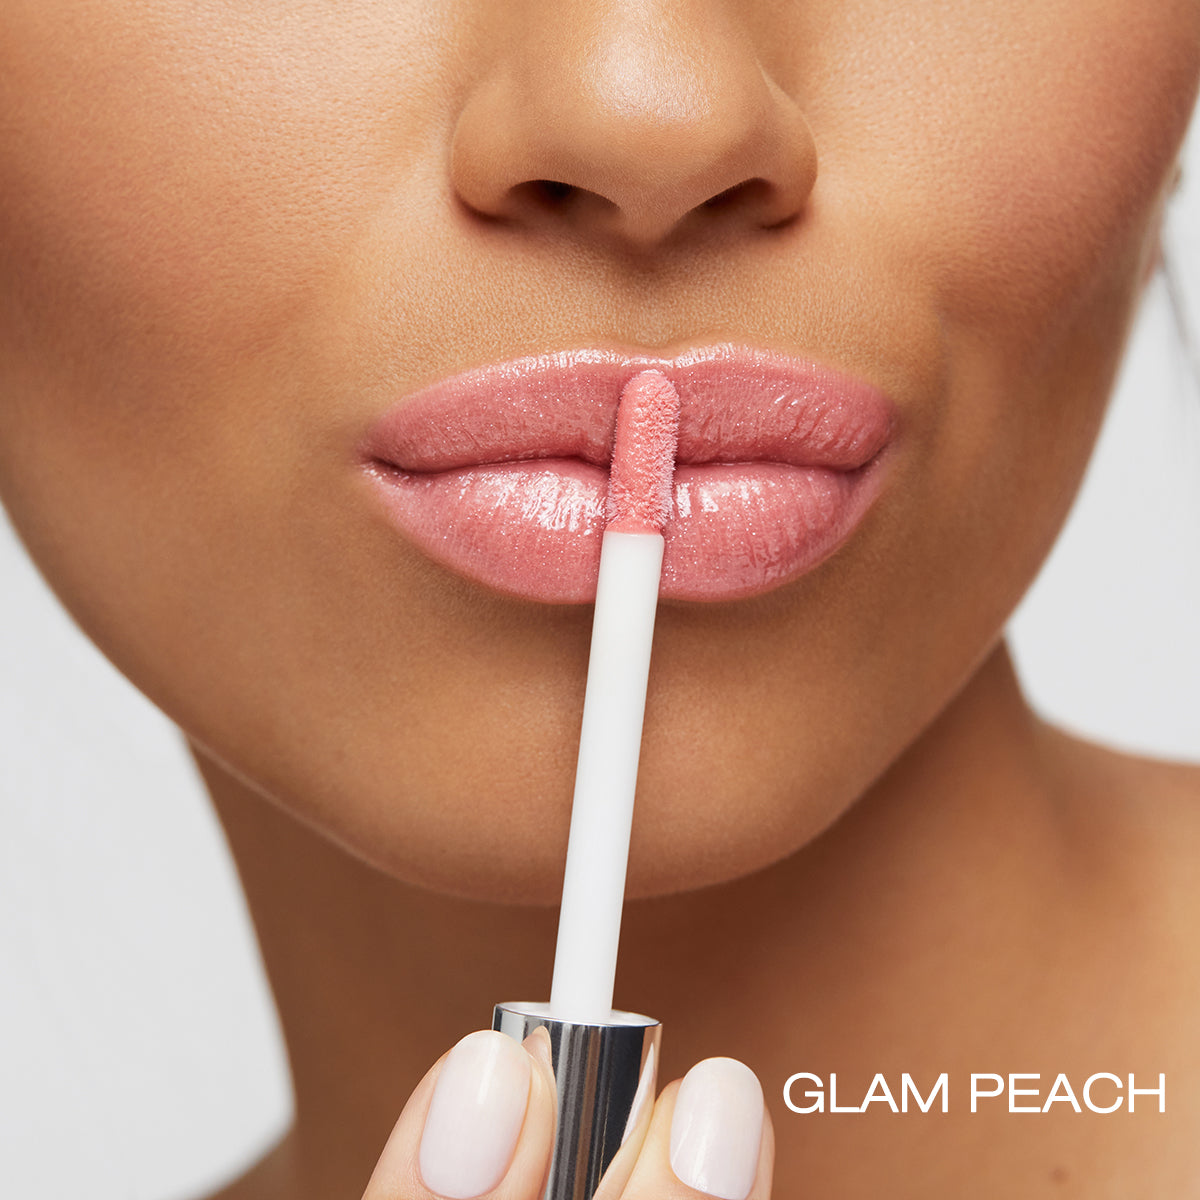 Application of the vegan moisturizing shea butter gloss to lips in shade glam peach